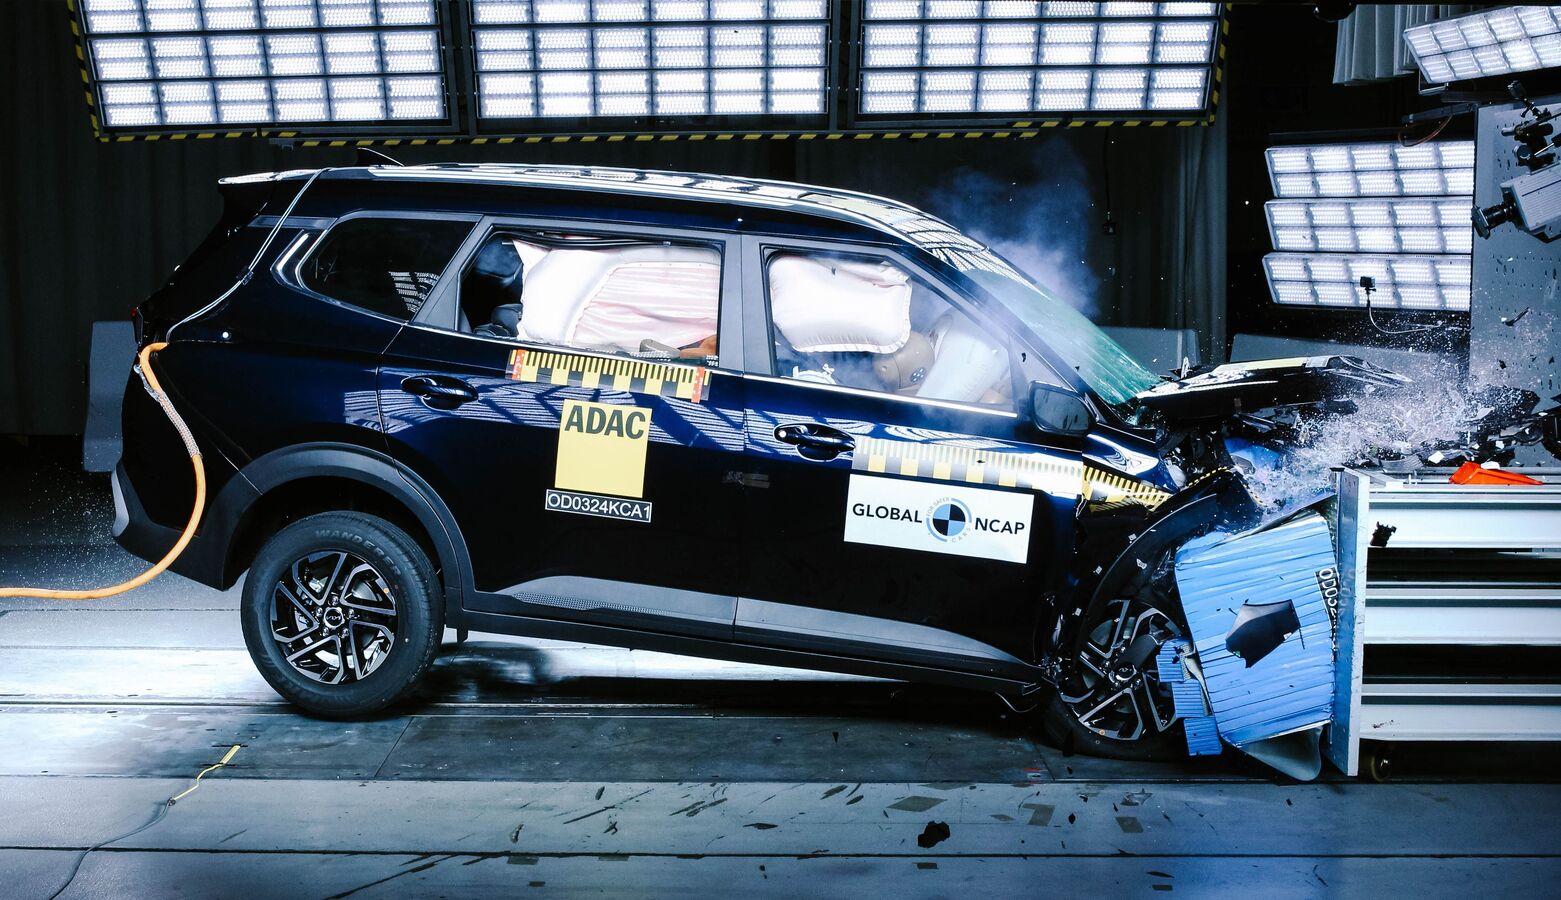 Kia Carens scores 3 stars in Global NCAP crash test. Check out the full report